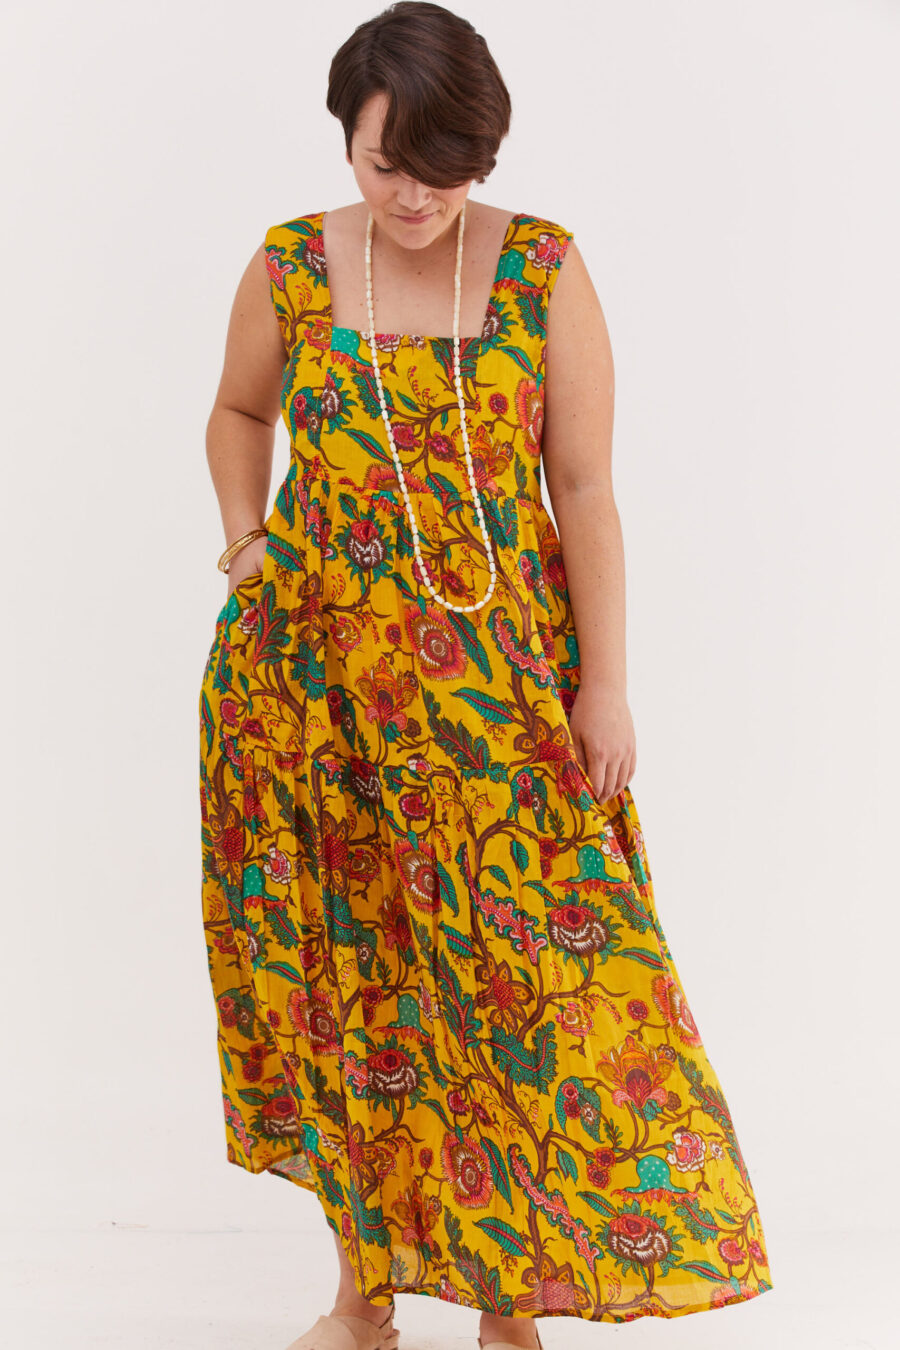 Lizi dress | Uniquely designed dress – Yellow flora print, yellow dress with colorful floral print by comfort zone boutique.